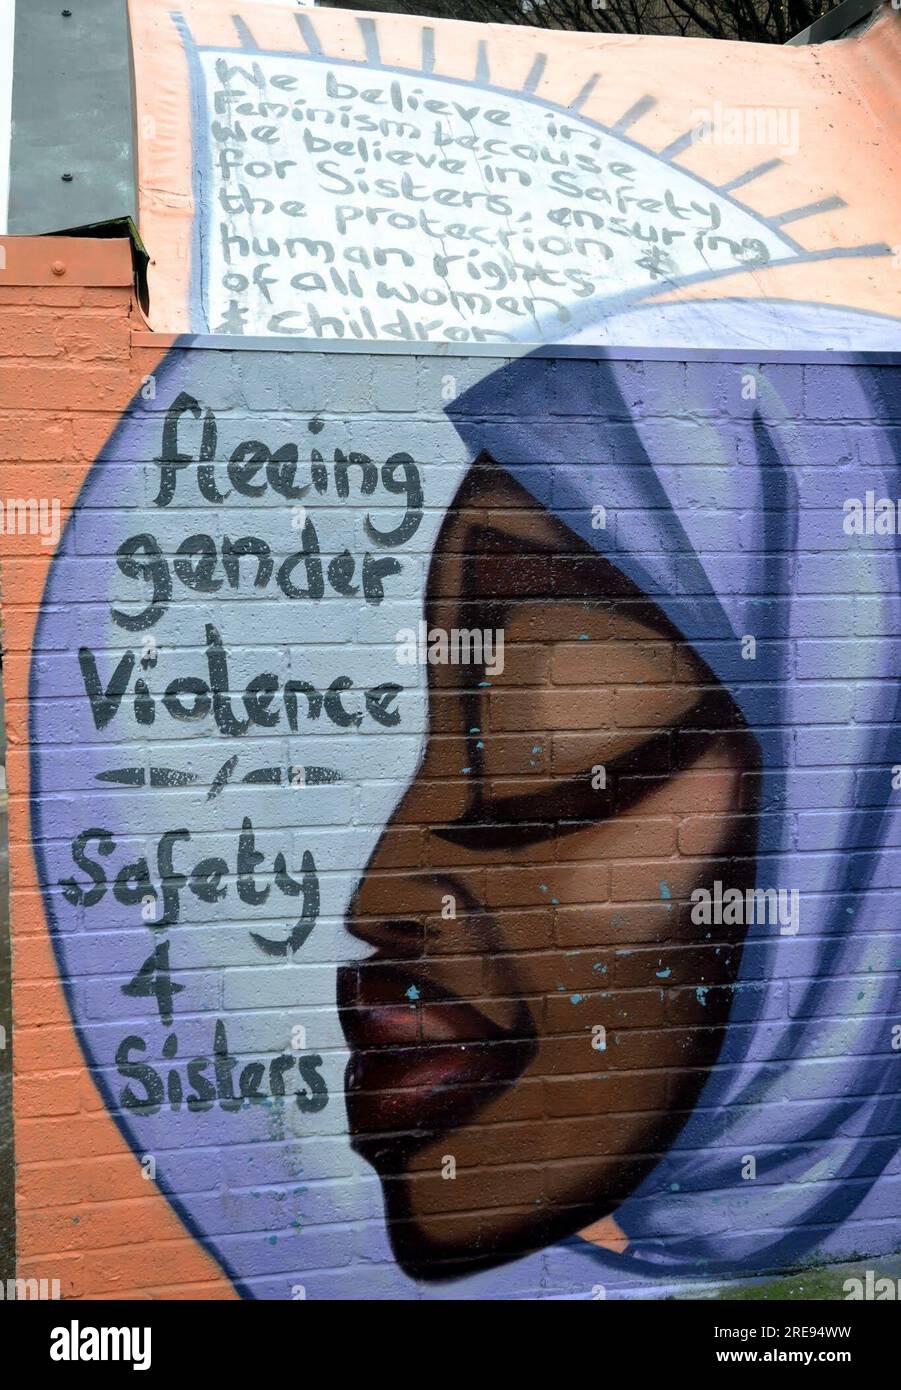 street art, painting on old wall in northern quarter, message is fleeing gender violence, safety 4 sisters, urban art, archival: Manchester, UK, Stock Photo